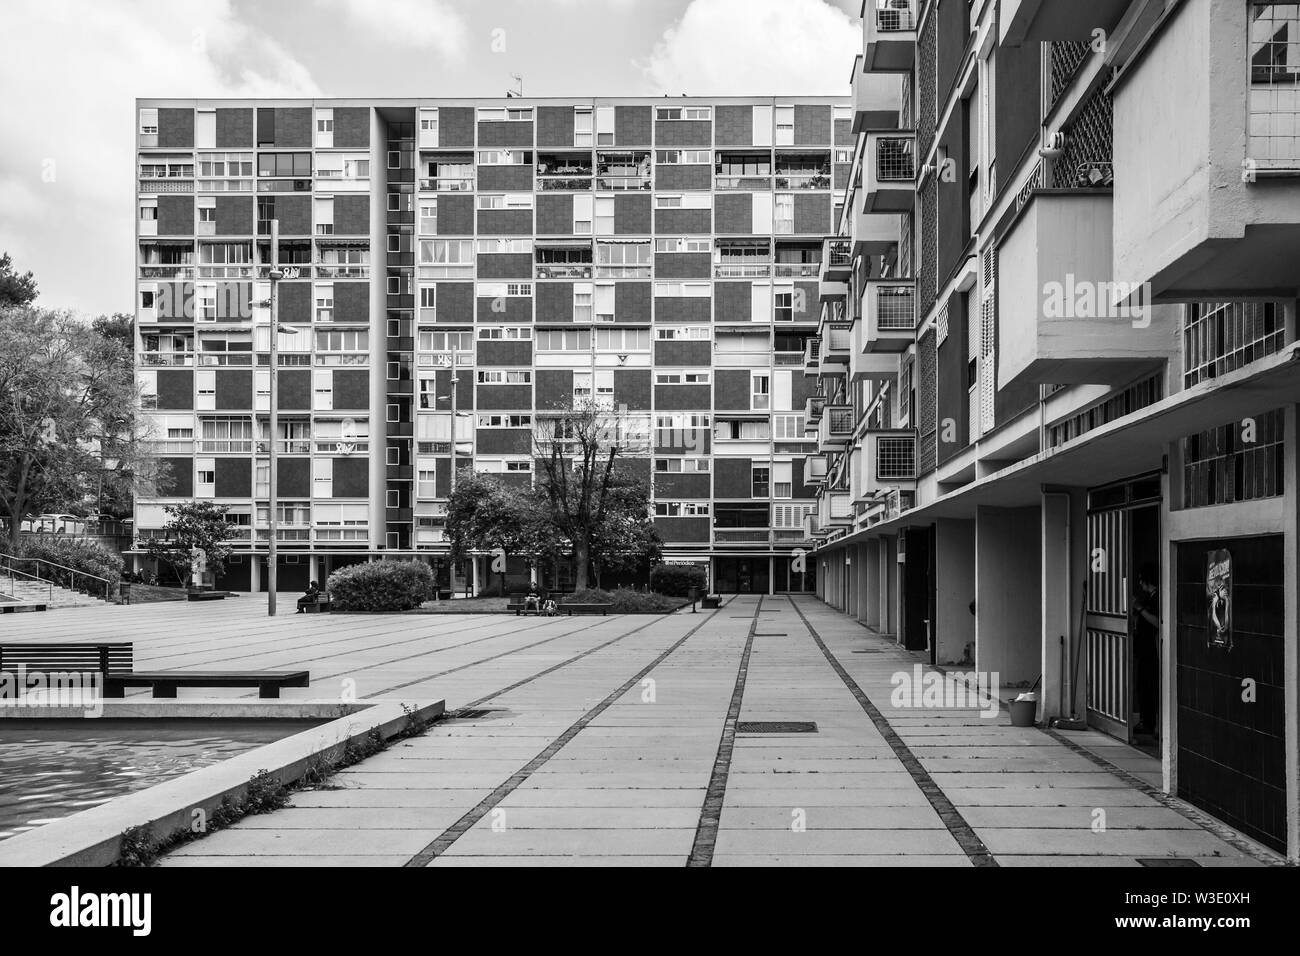 Barcelona, Spain.Montbau quarter, Residential buildings, built from 1960, example of rationalist architecture style. Stock Photo